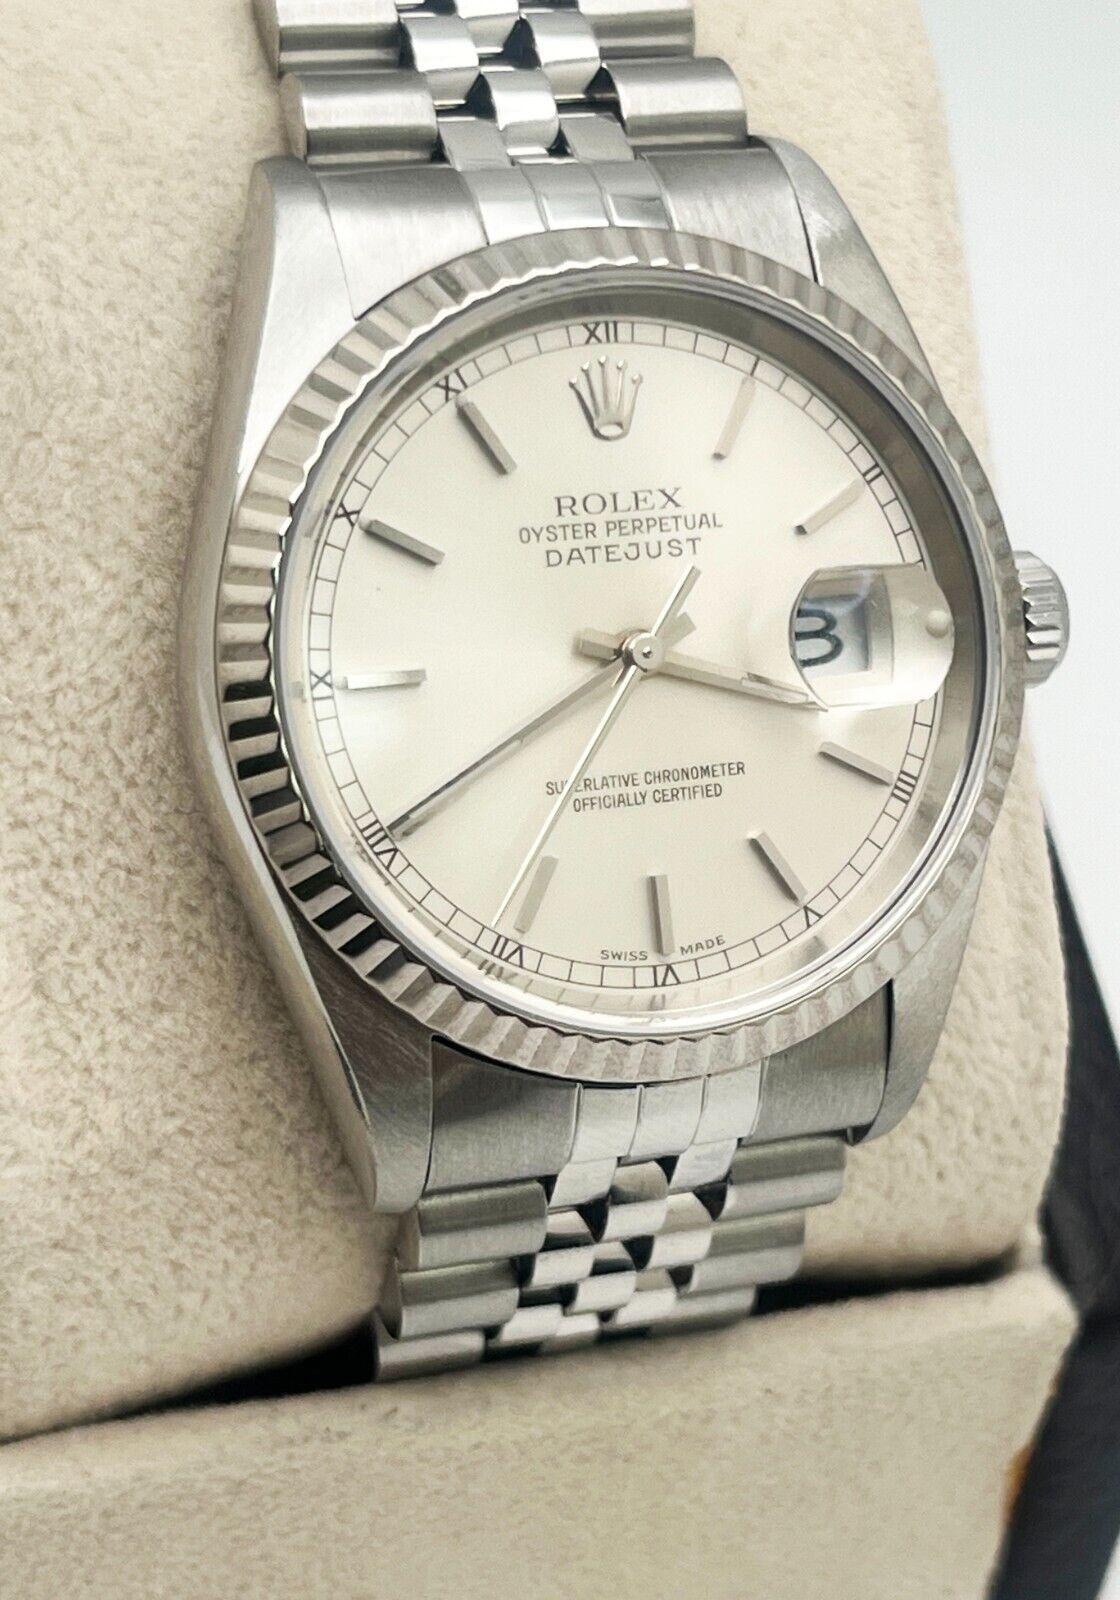 Style Number: 16234

Serial: A835***

Year: 2000
 
Model: Datejust
 
Case Material: Stainless Steel
 
Band: Stainless Steel
  
Bezel: 18K White Gold
 
Dial: Silver
 
Face: Sapphire Crystal
 
Case Size: 36mm
 
Includes: 
-Rolex Box &